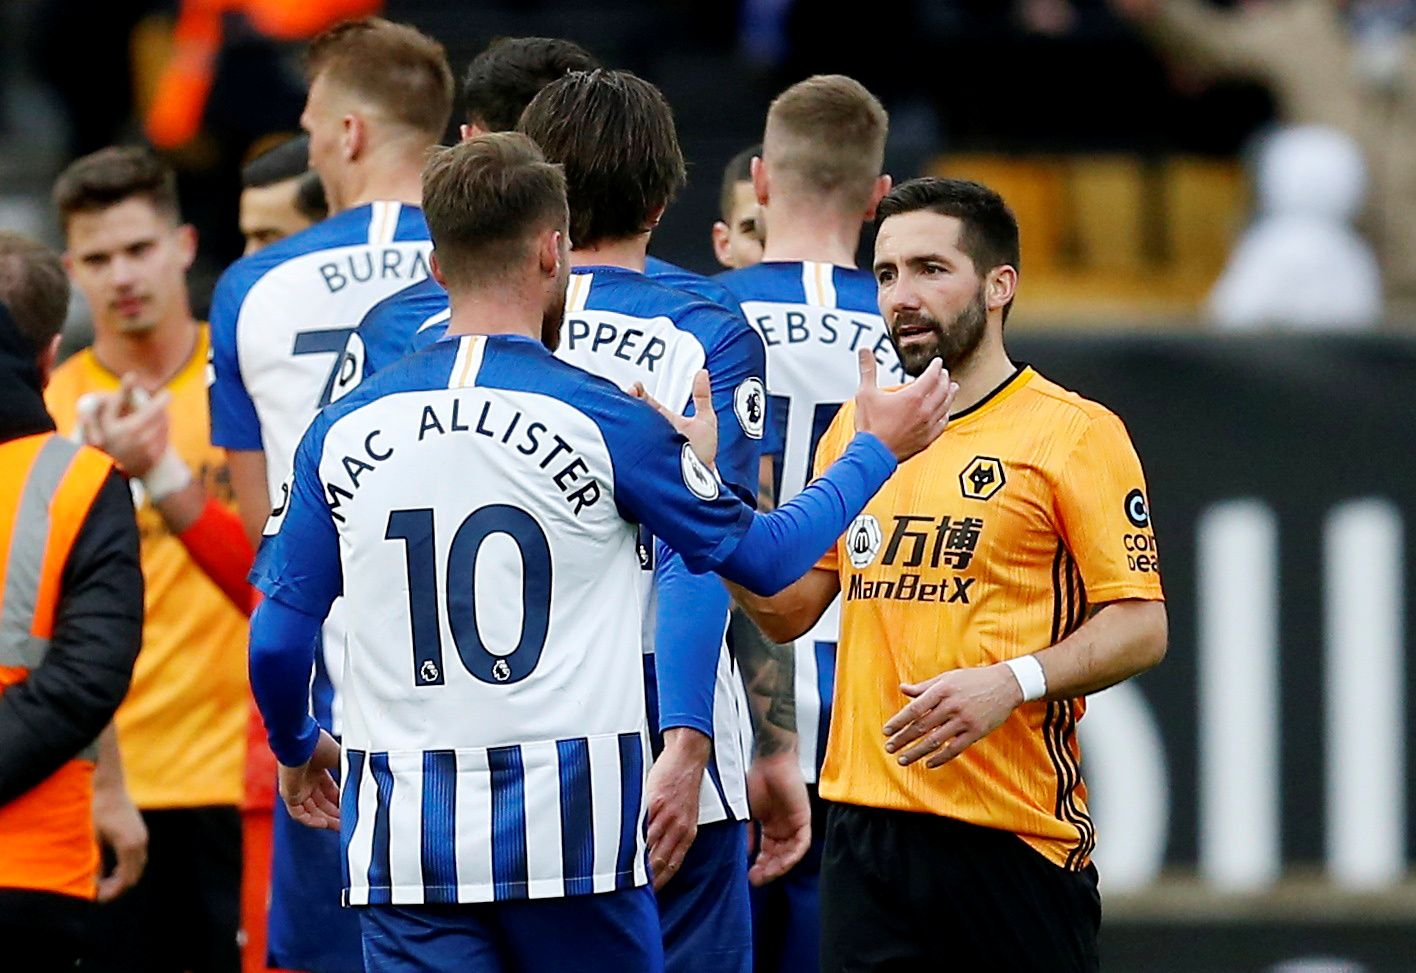 Soccer Football - Premier League - Wolverhampton Wanderers v Brighton &amp; Hove Albion - Molineux Stadium, Wolverhampton, Britain - March 7, 2020  Wolverhampton Wanderers' Joao Moutinho and Brighton &amp; Hove Albion's Alexis Mac Allister shake hands at the end of the match   Action Images via Reuters/Craig Brough  EDITORIAL USE ONLY. No use with unauthorized audio, video, data, fixture lists, club/league logos or 